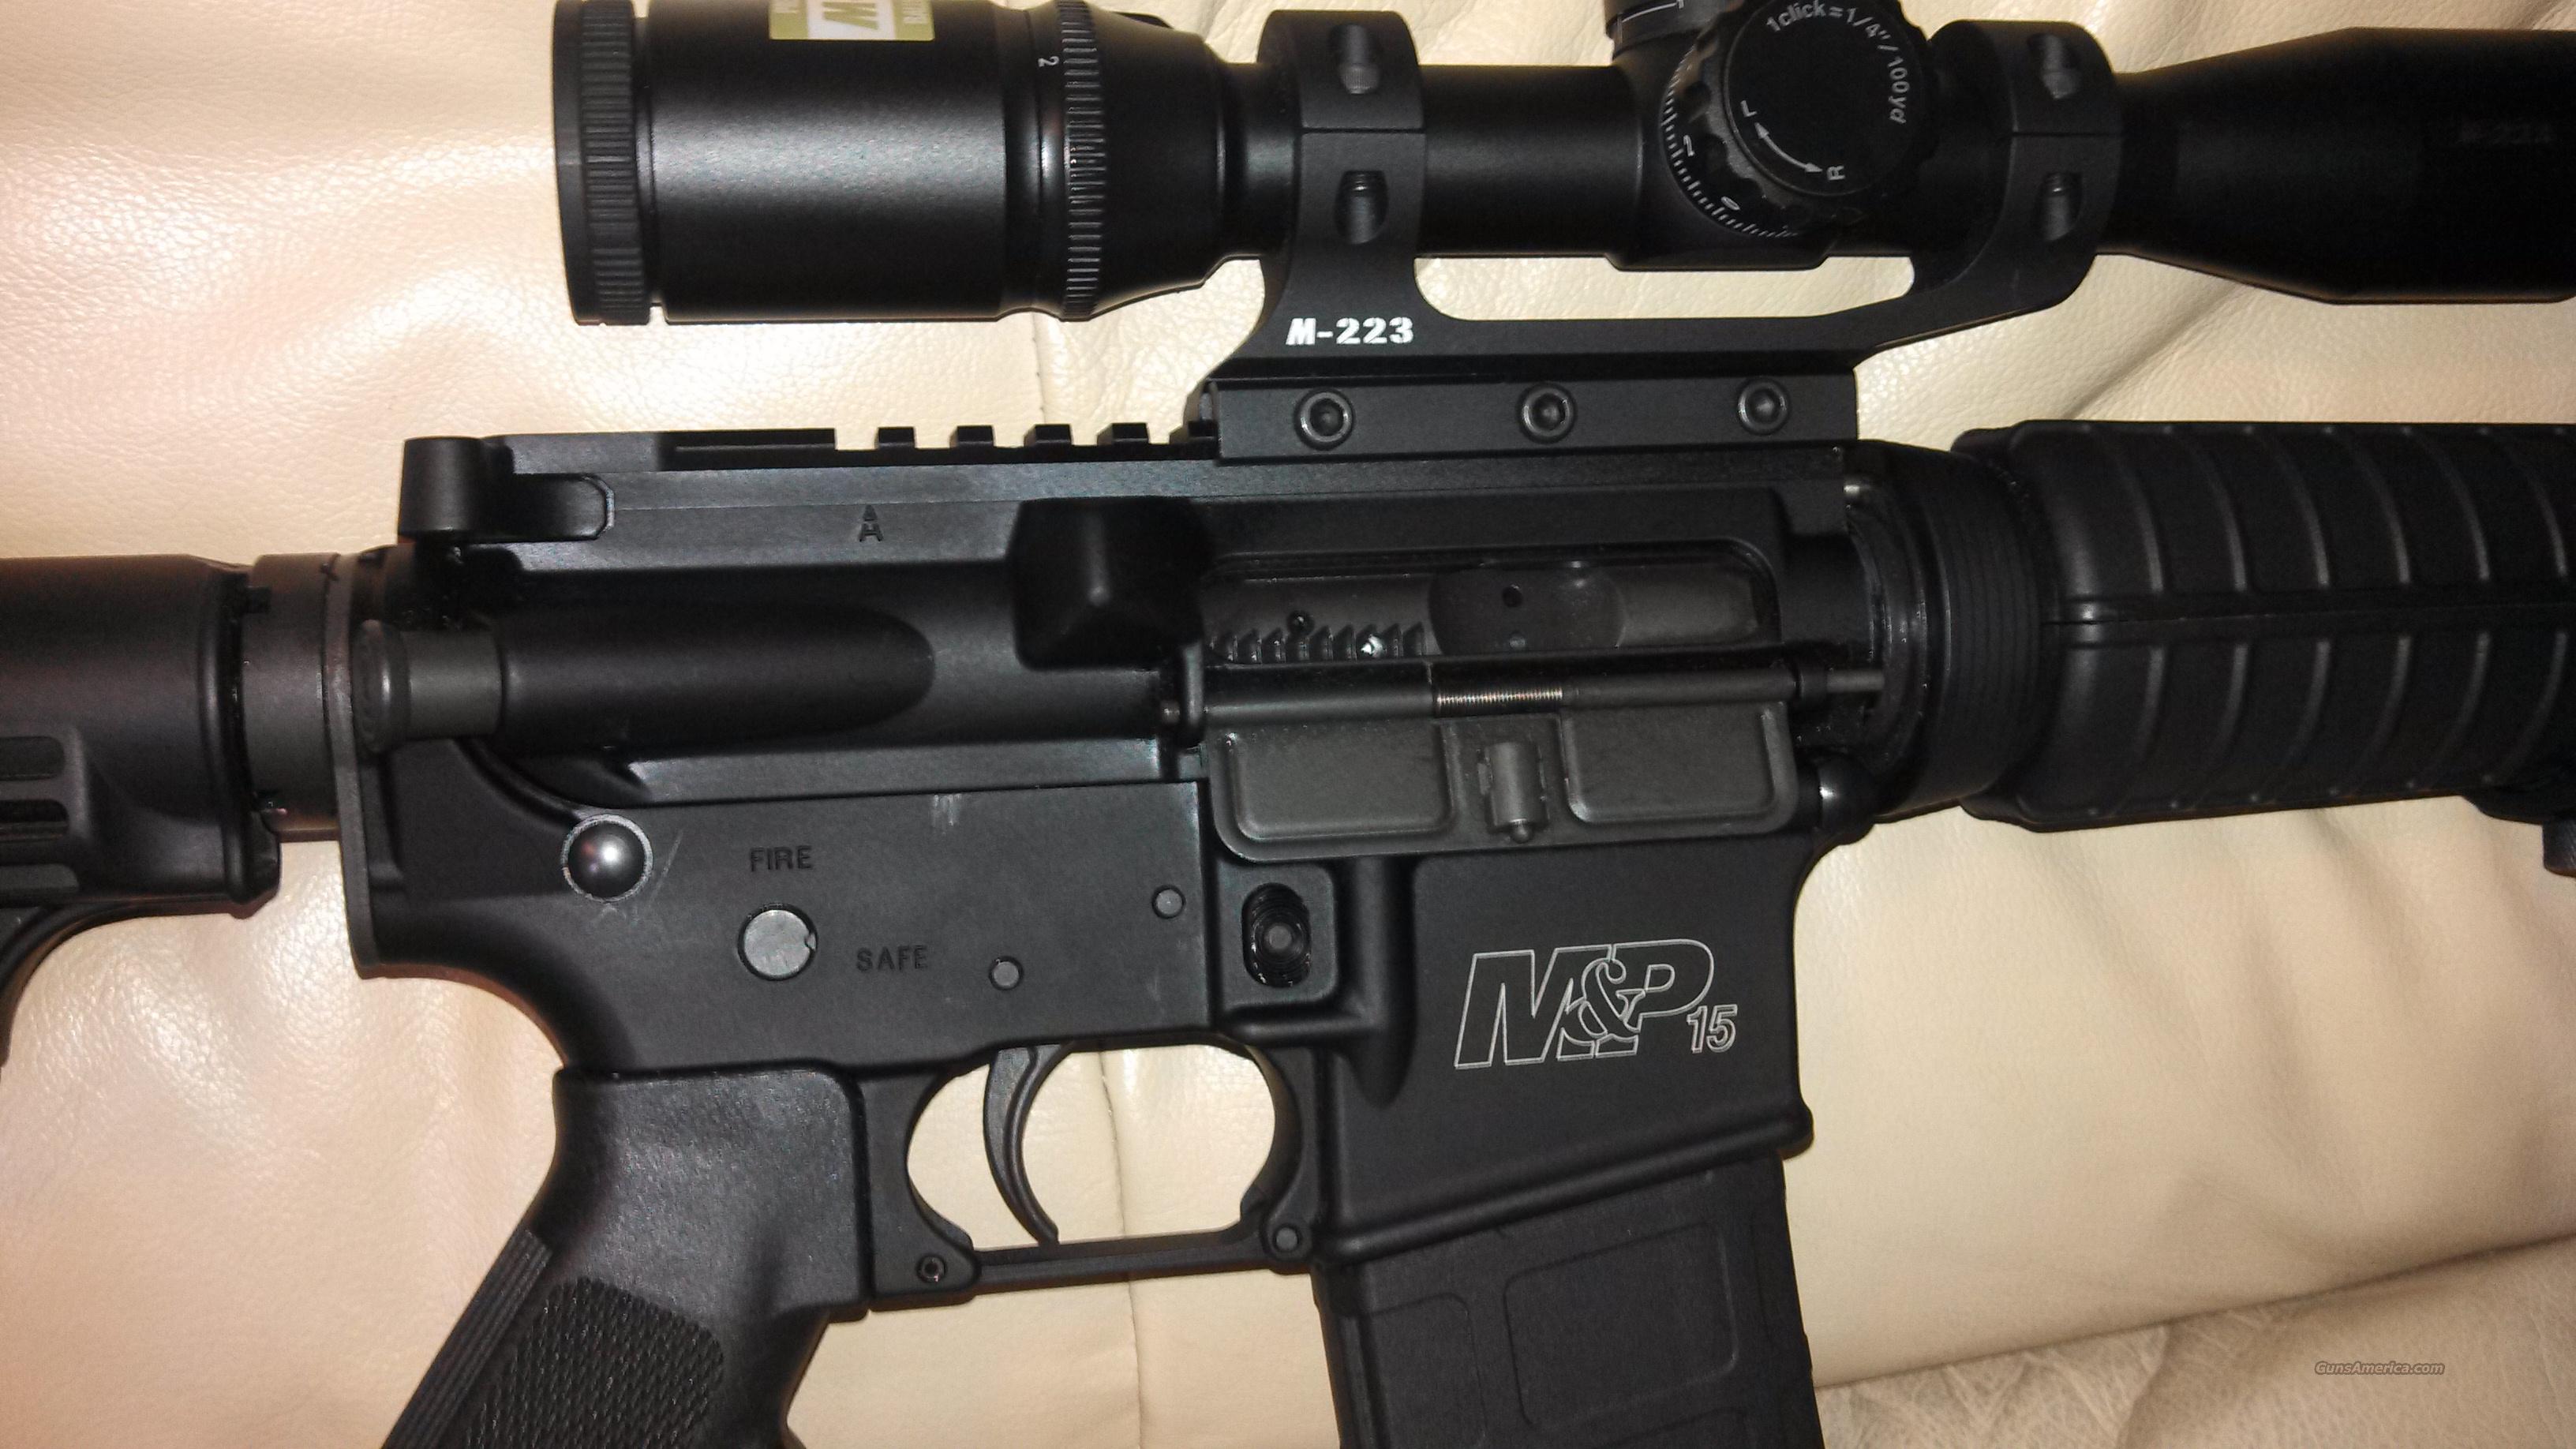 S&W M&P 15 Optics Ready MINT with A... for sale at Gunsamerica.com ...